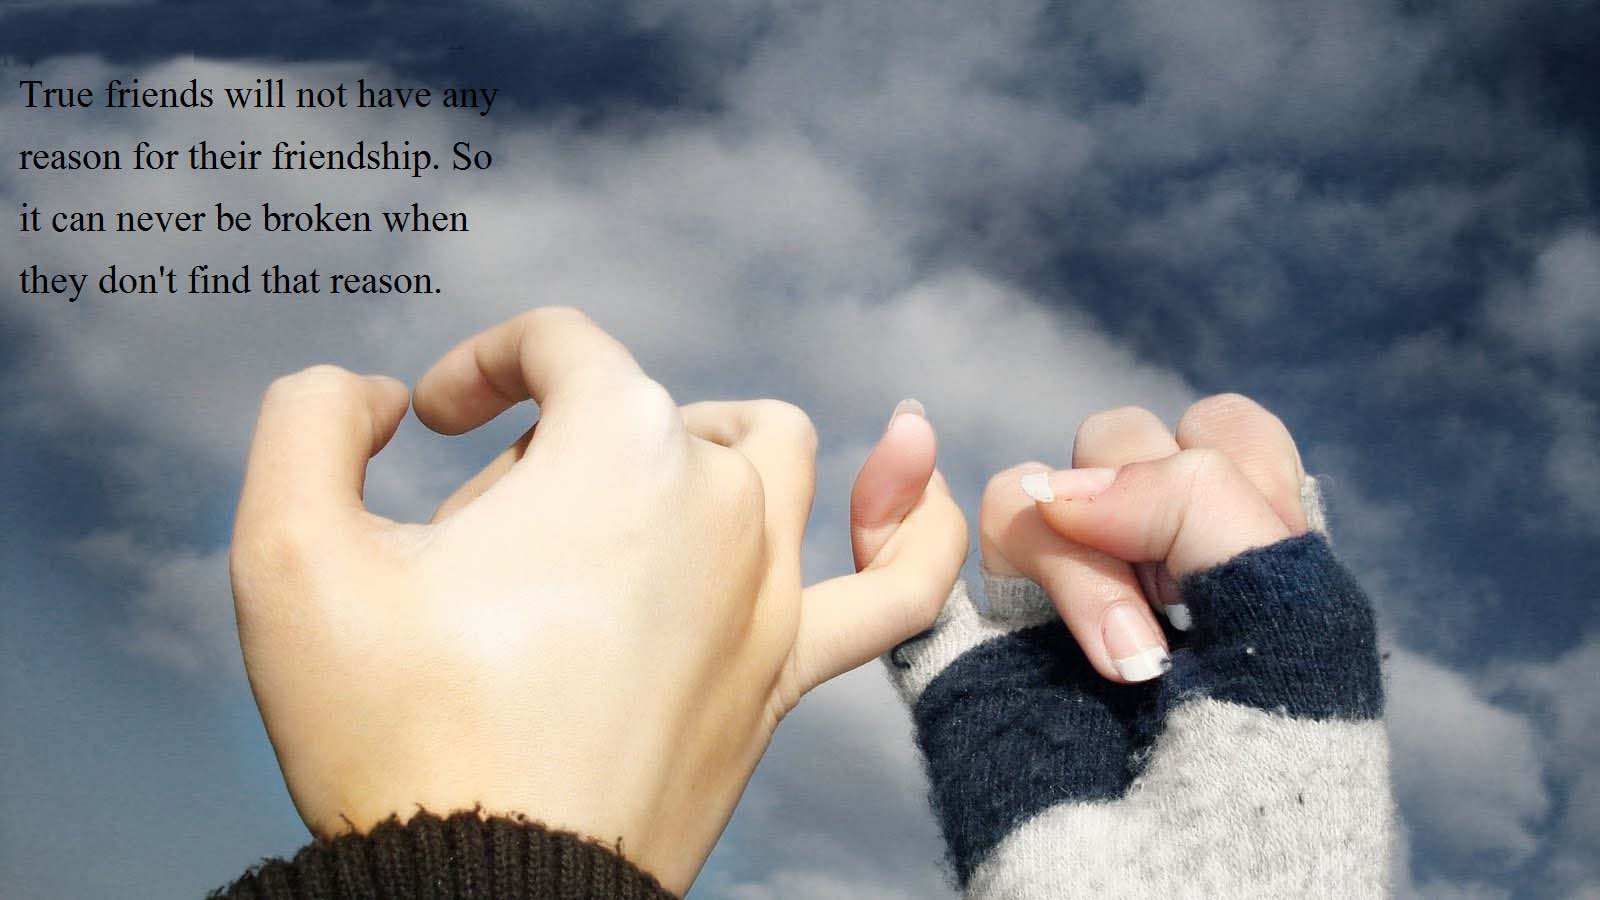 friendship wallpapers with messages tamil